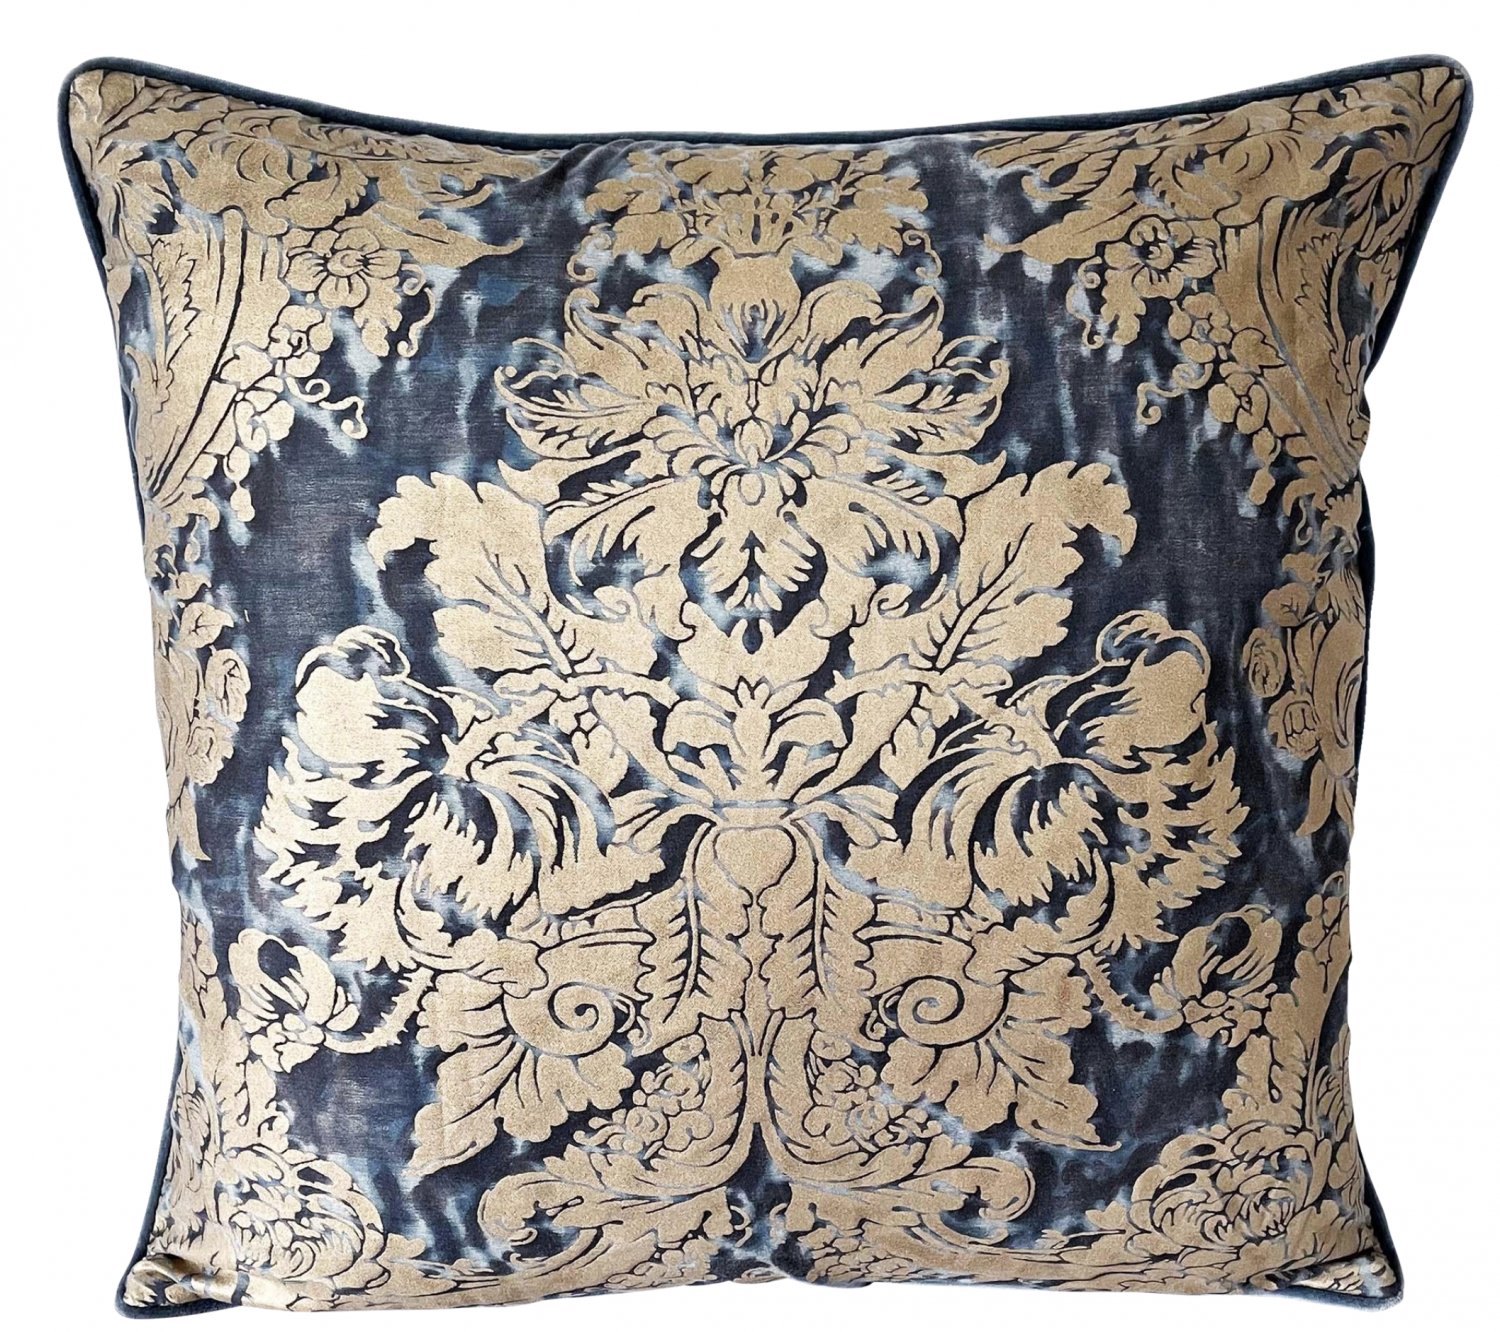 Authentic Mariano Fortuny Designer Pillow